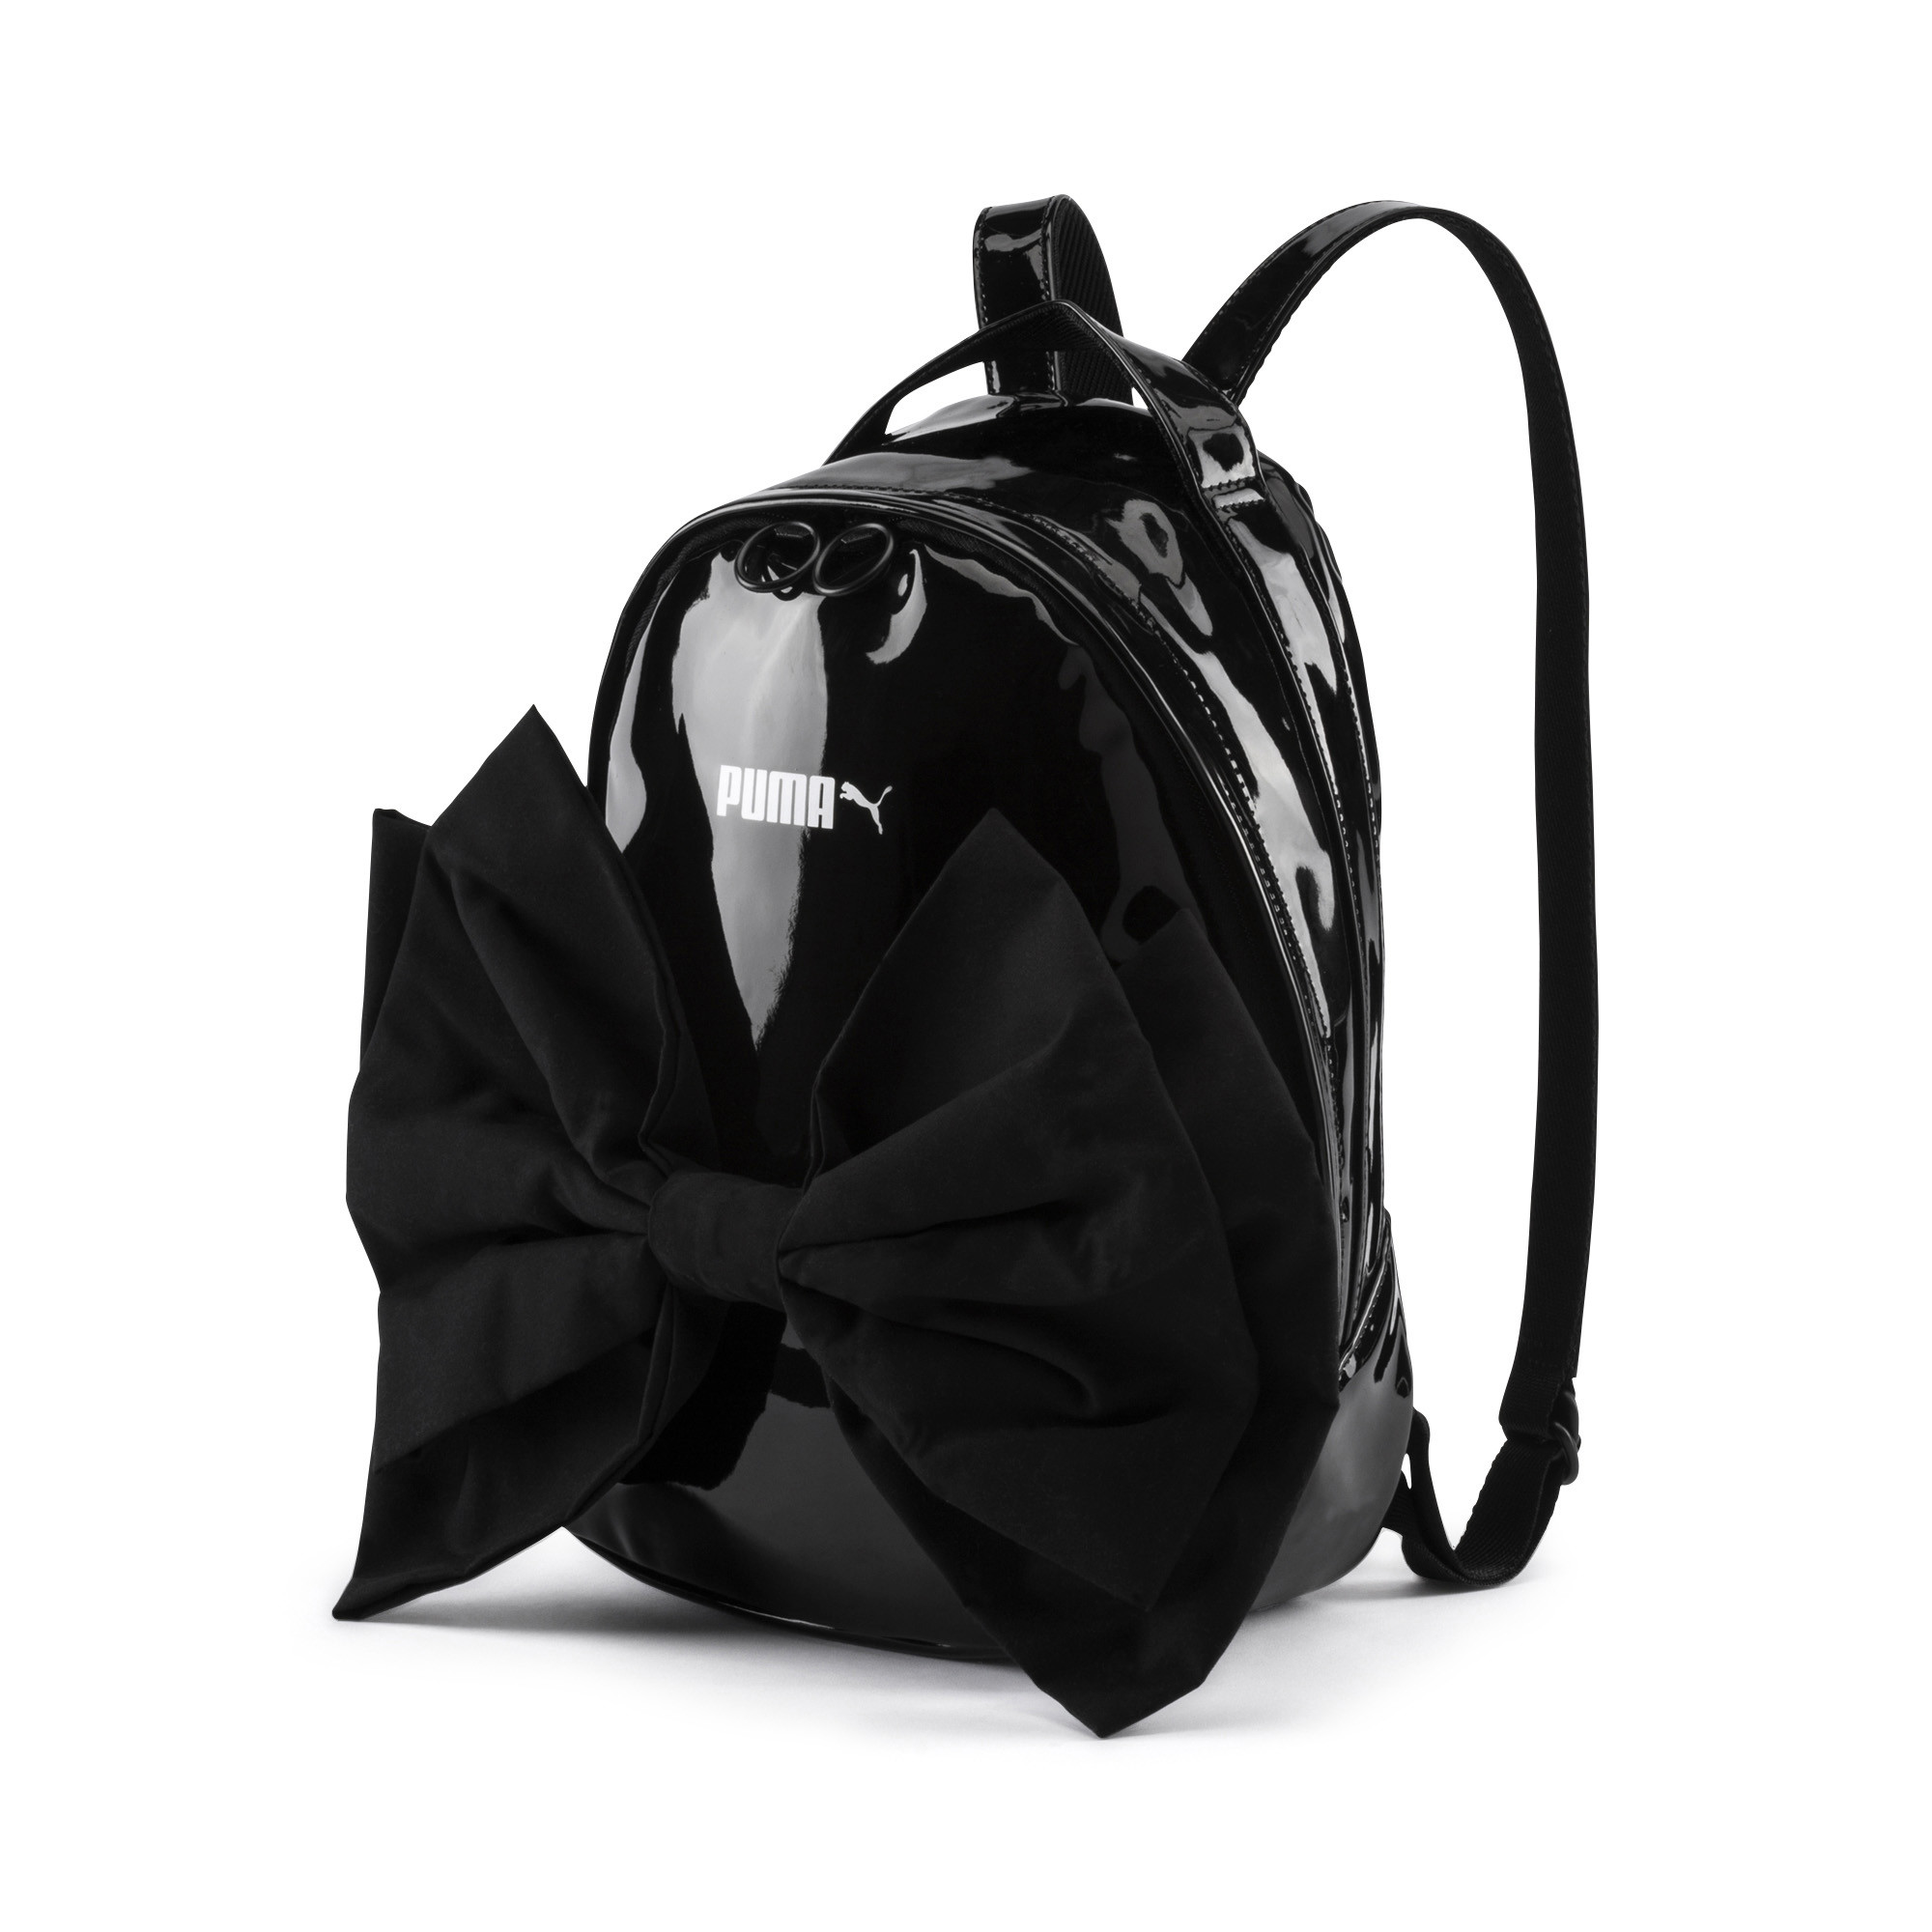 Archive Bow Suede Women’s Backpack (white or black) $90.00 from Puma